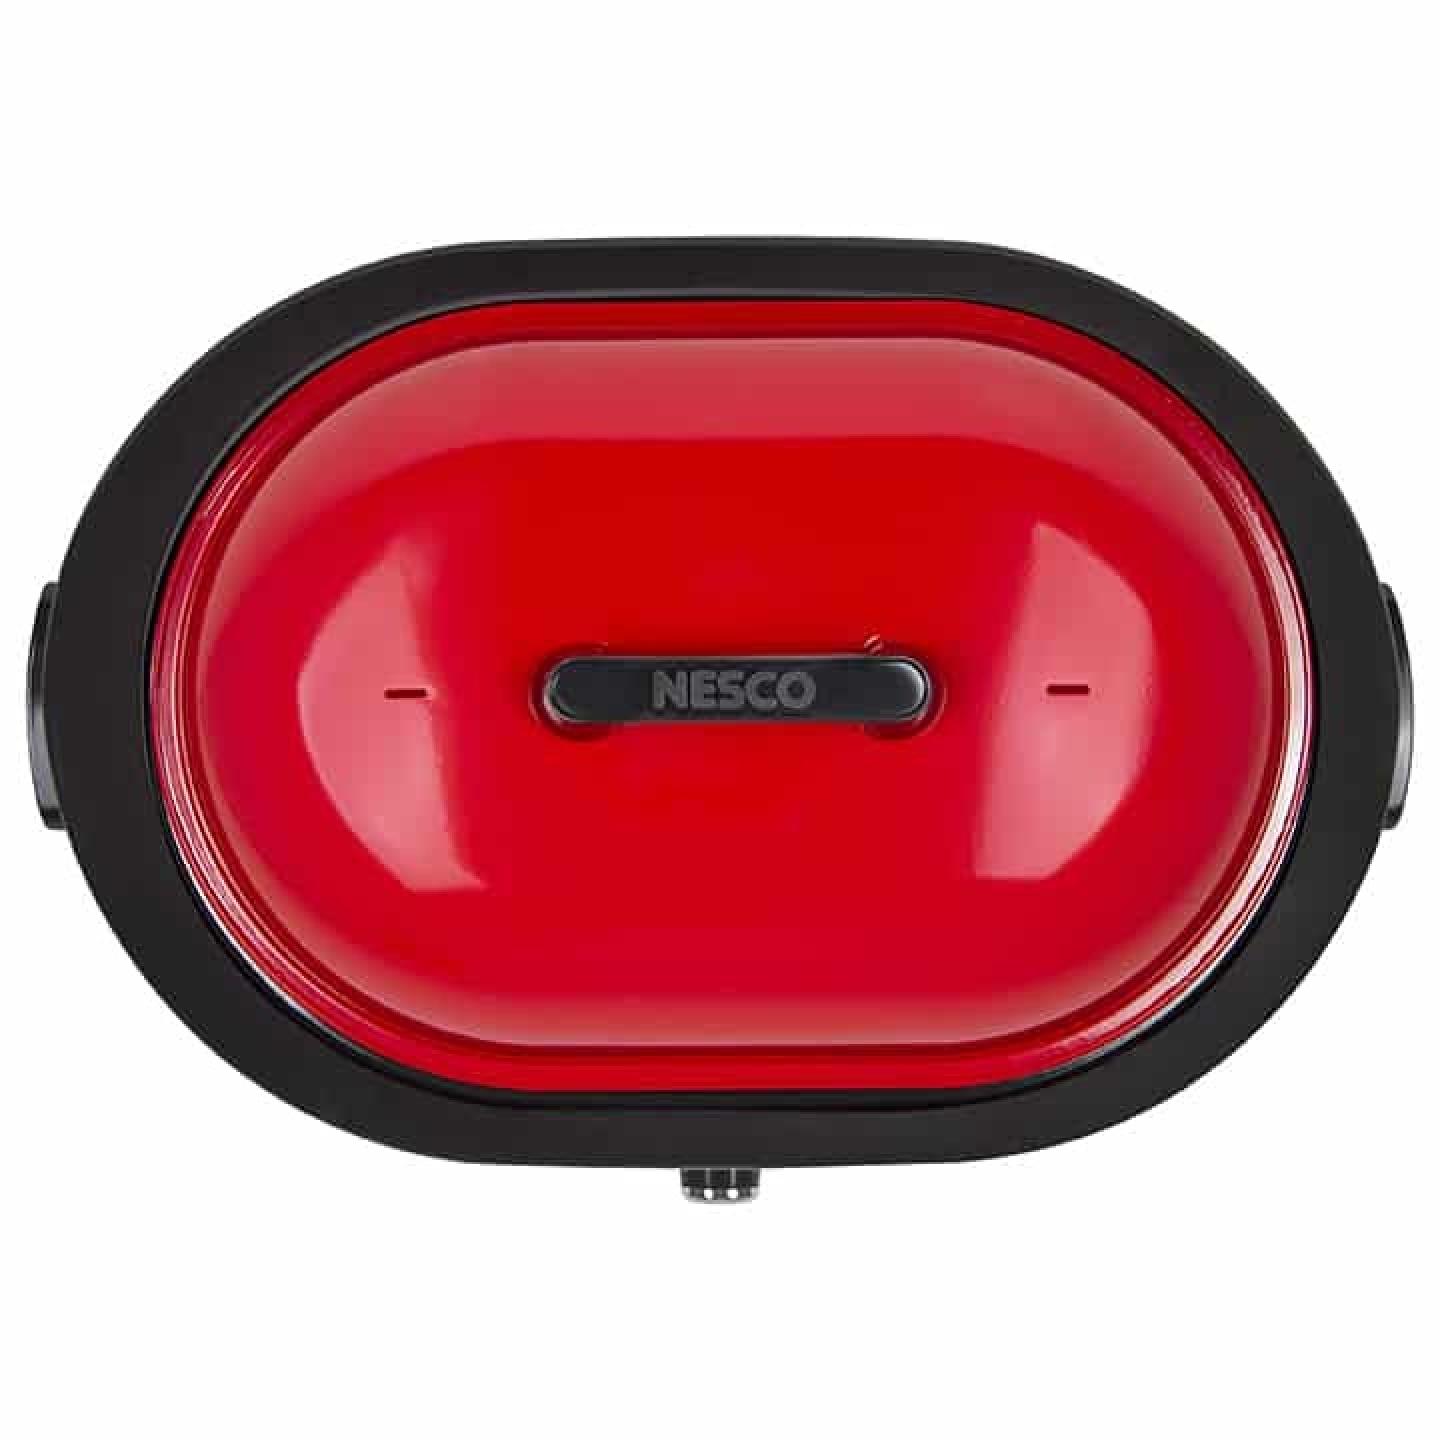 Nesco 18 Qt. Red Roaster Oven Porcelain Cookwell Top